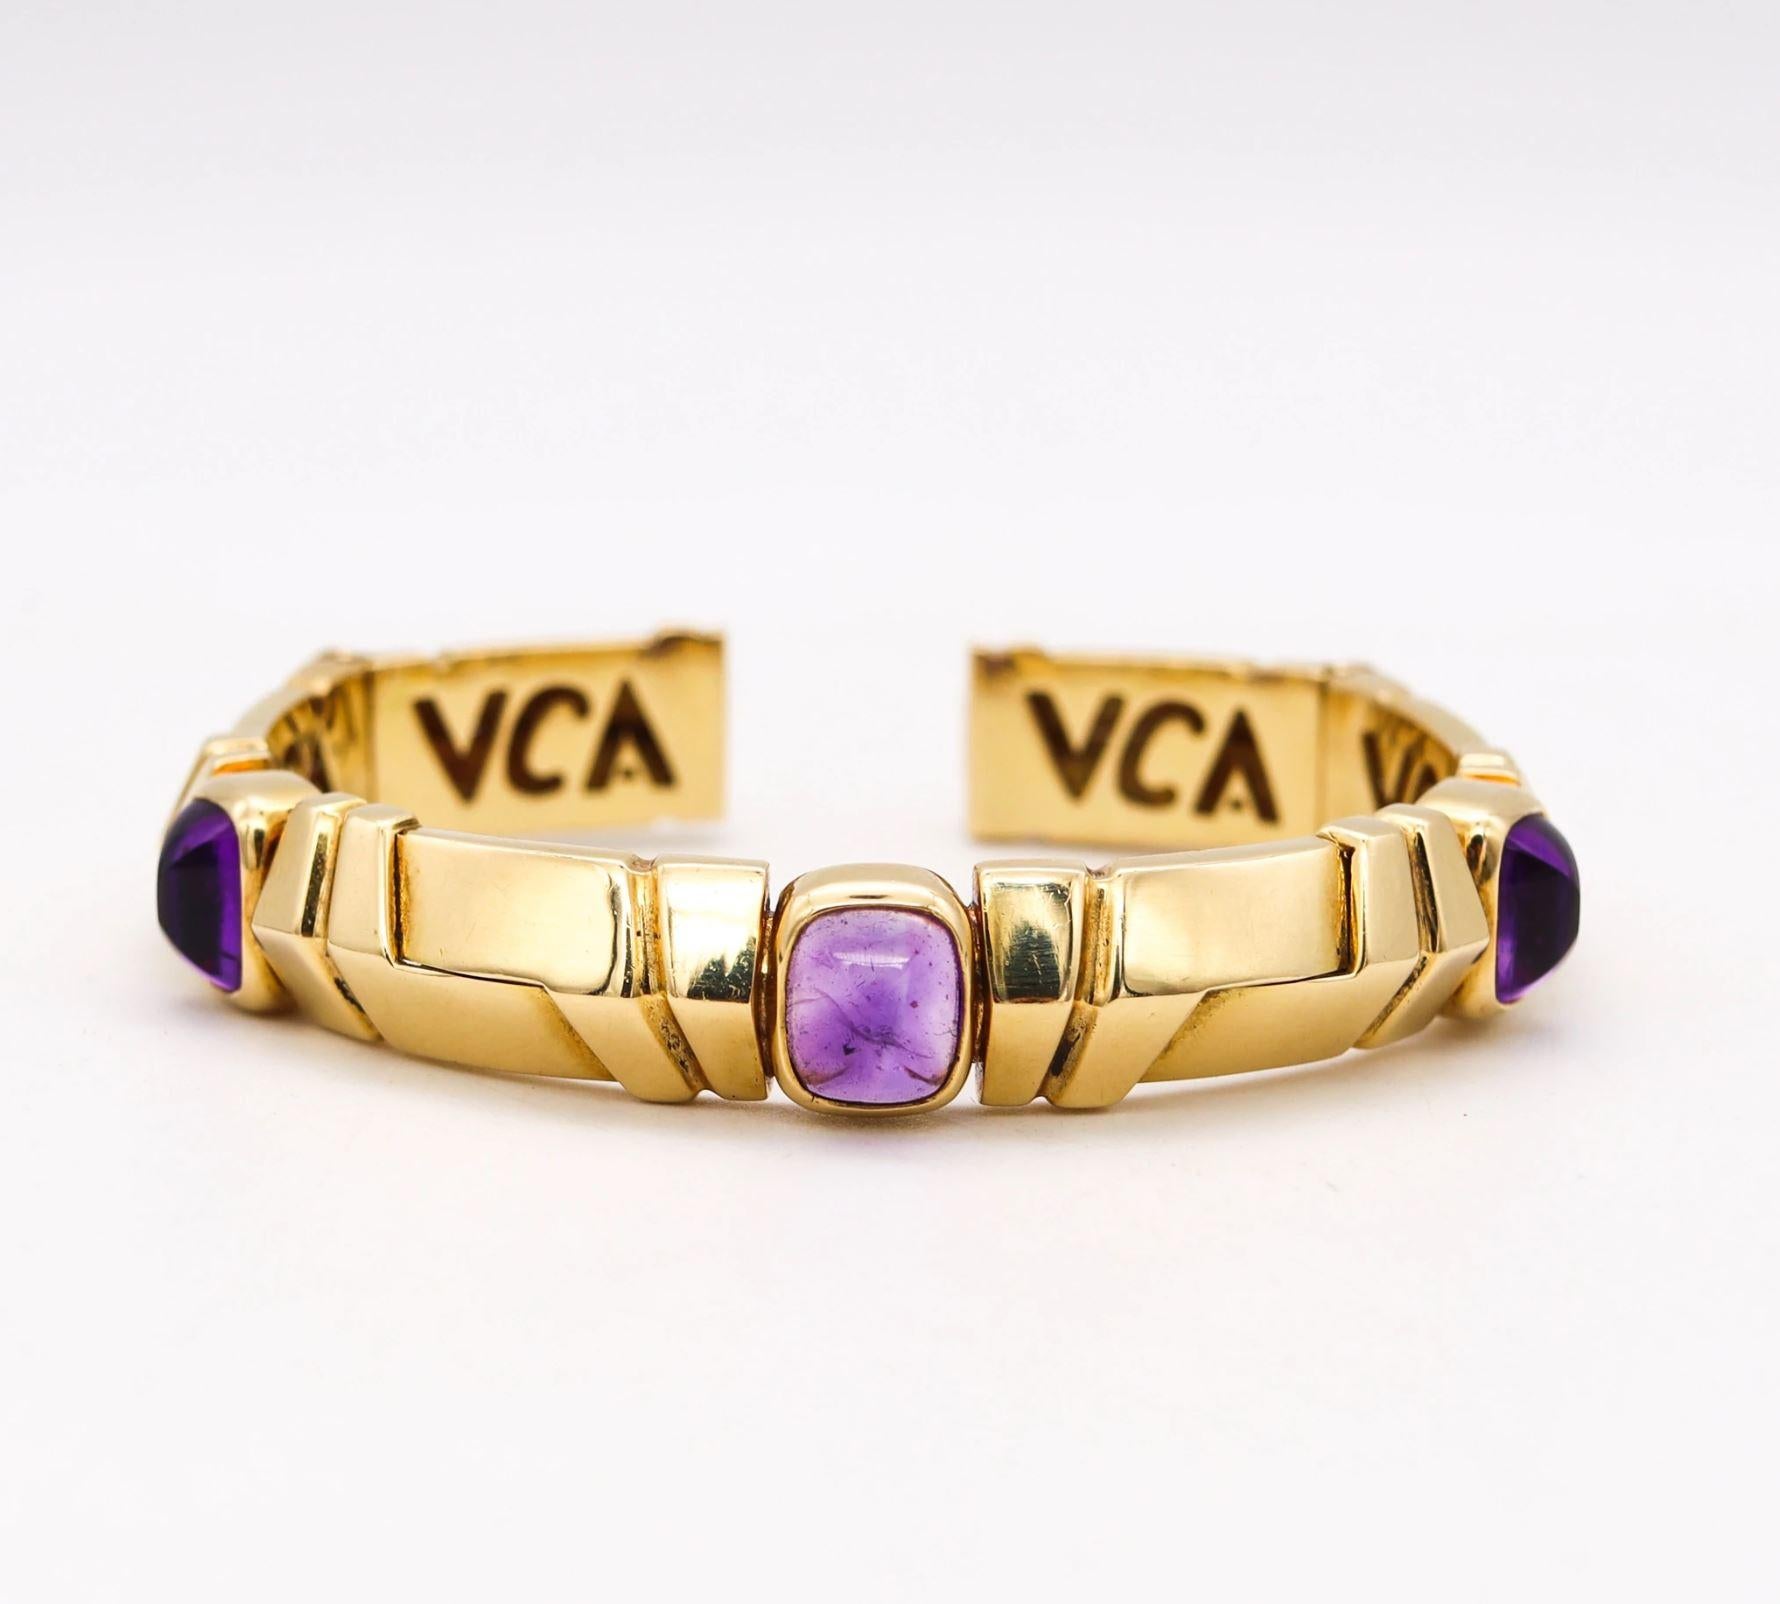 Modern cuff bracelet designed by Van Cleef & Arpels.

A youthful and colorful bracelet created in Paris France by the iconic house of Van Cleef & Arpels, back in the late 1980's. This rare cuff bracelet was crafted in solid yellow gold of 18 karats,